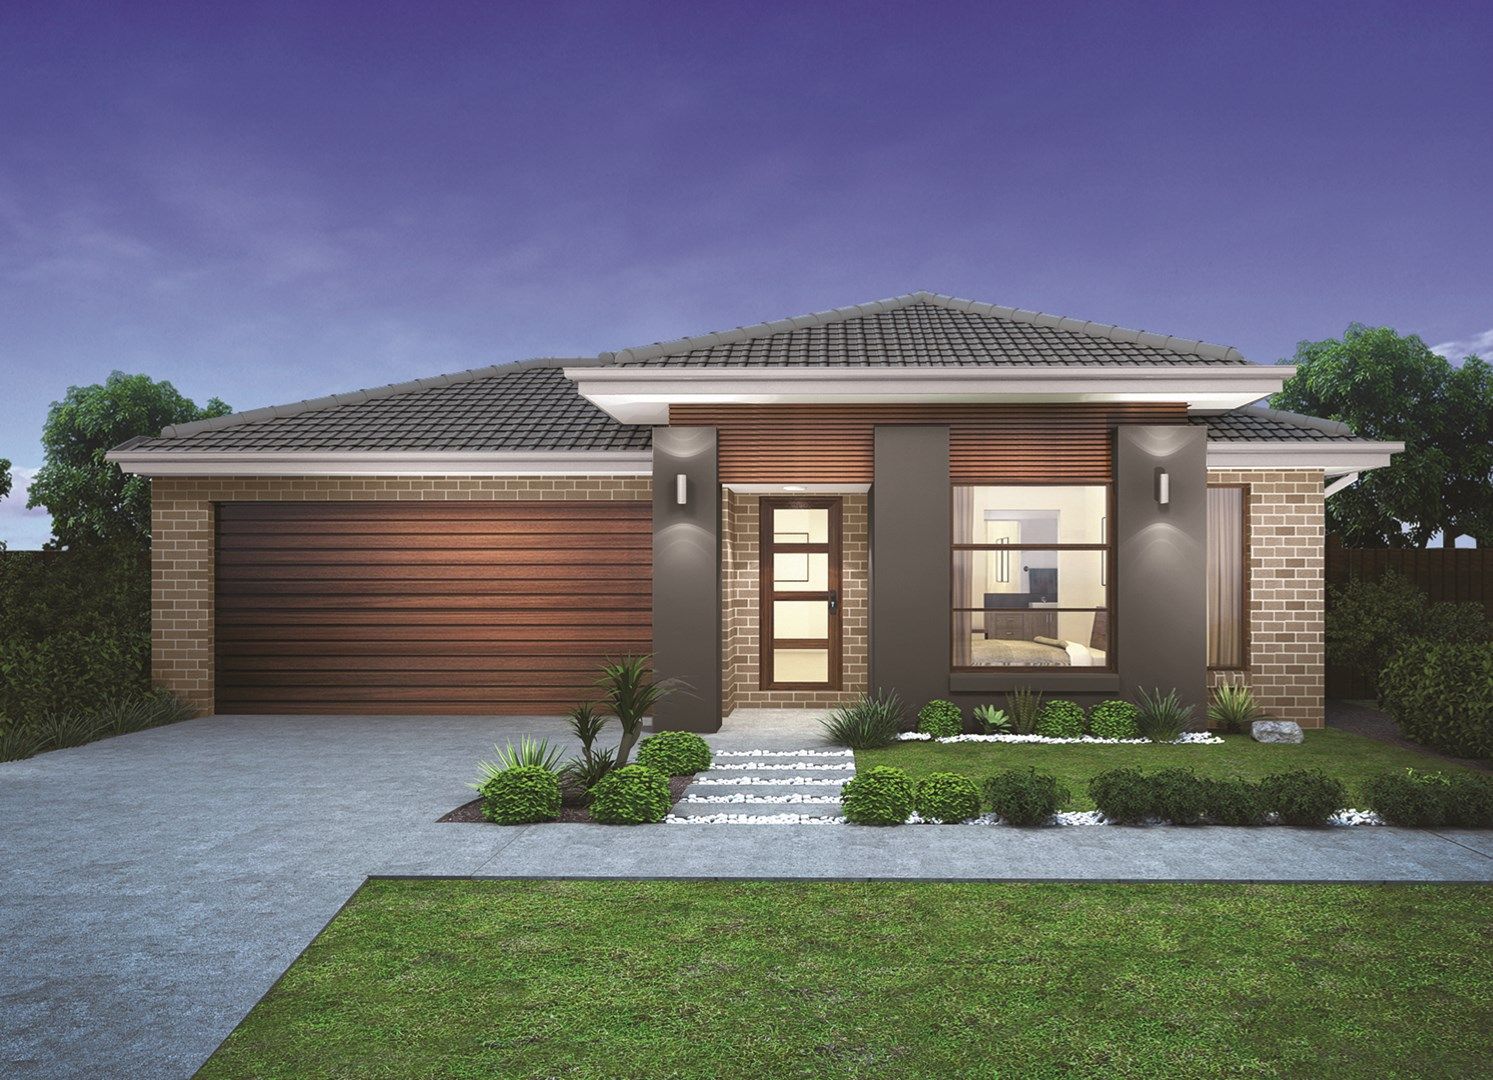 4 bedrooms New House & Land in LOT 556 Taylors Run FRASER RISE VIC, 3336